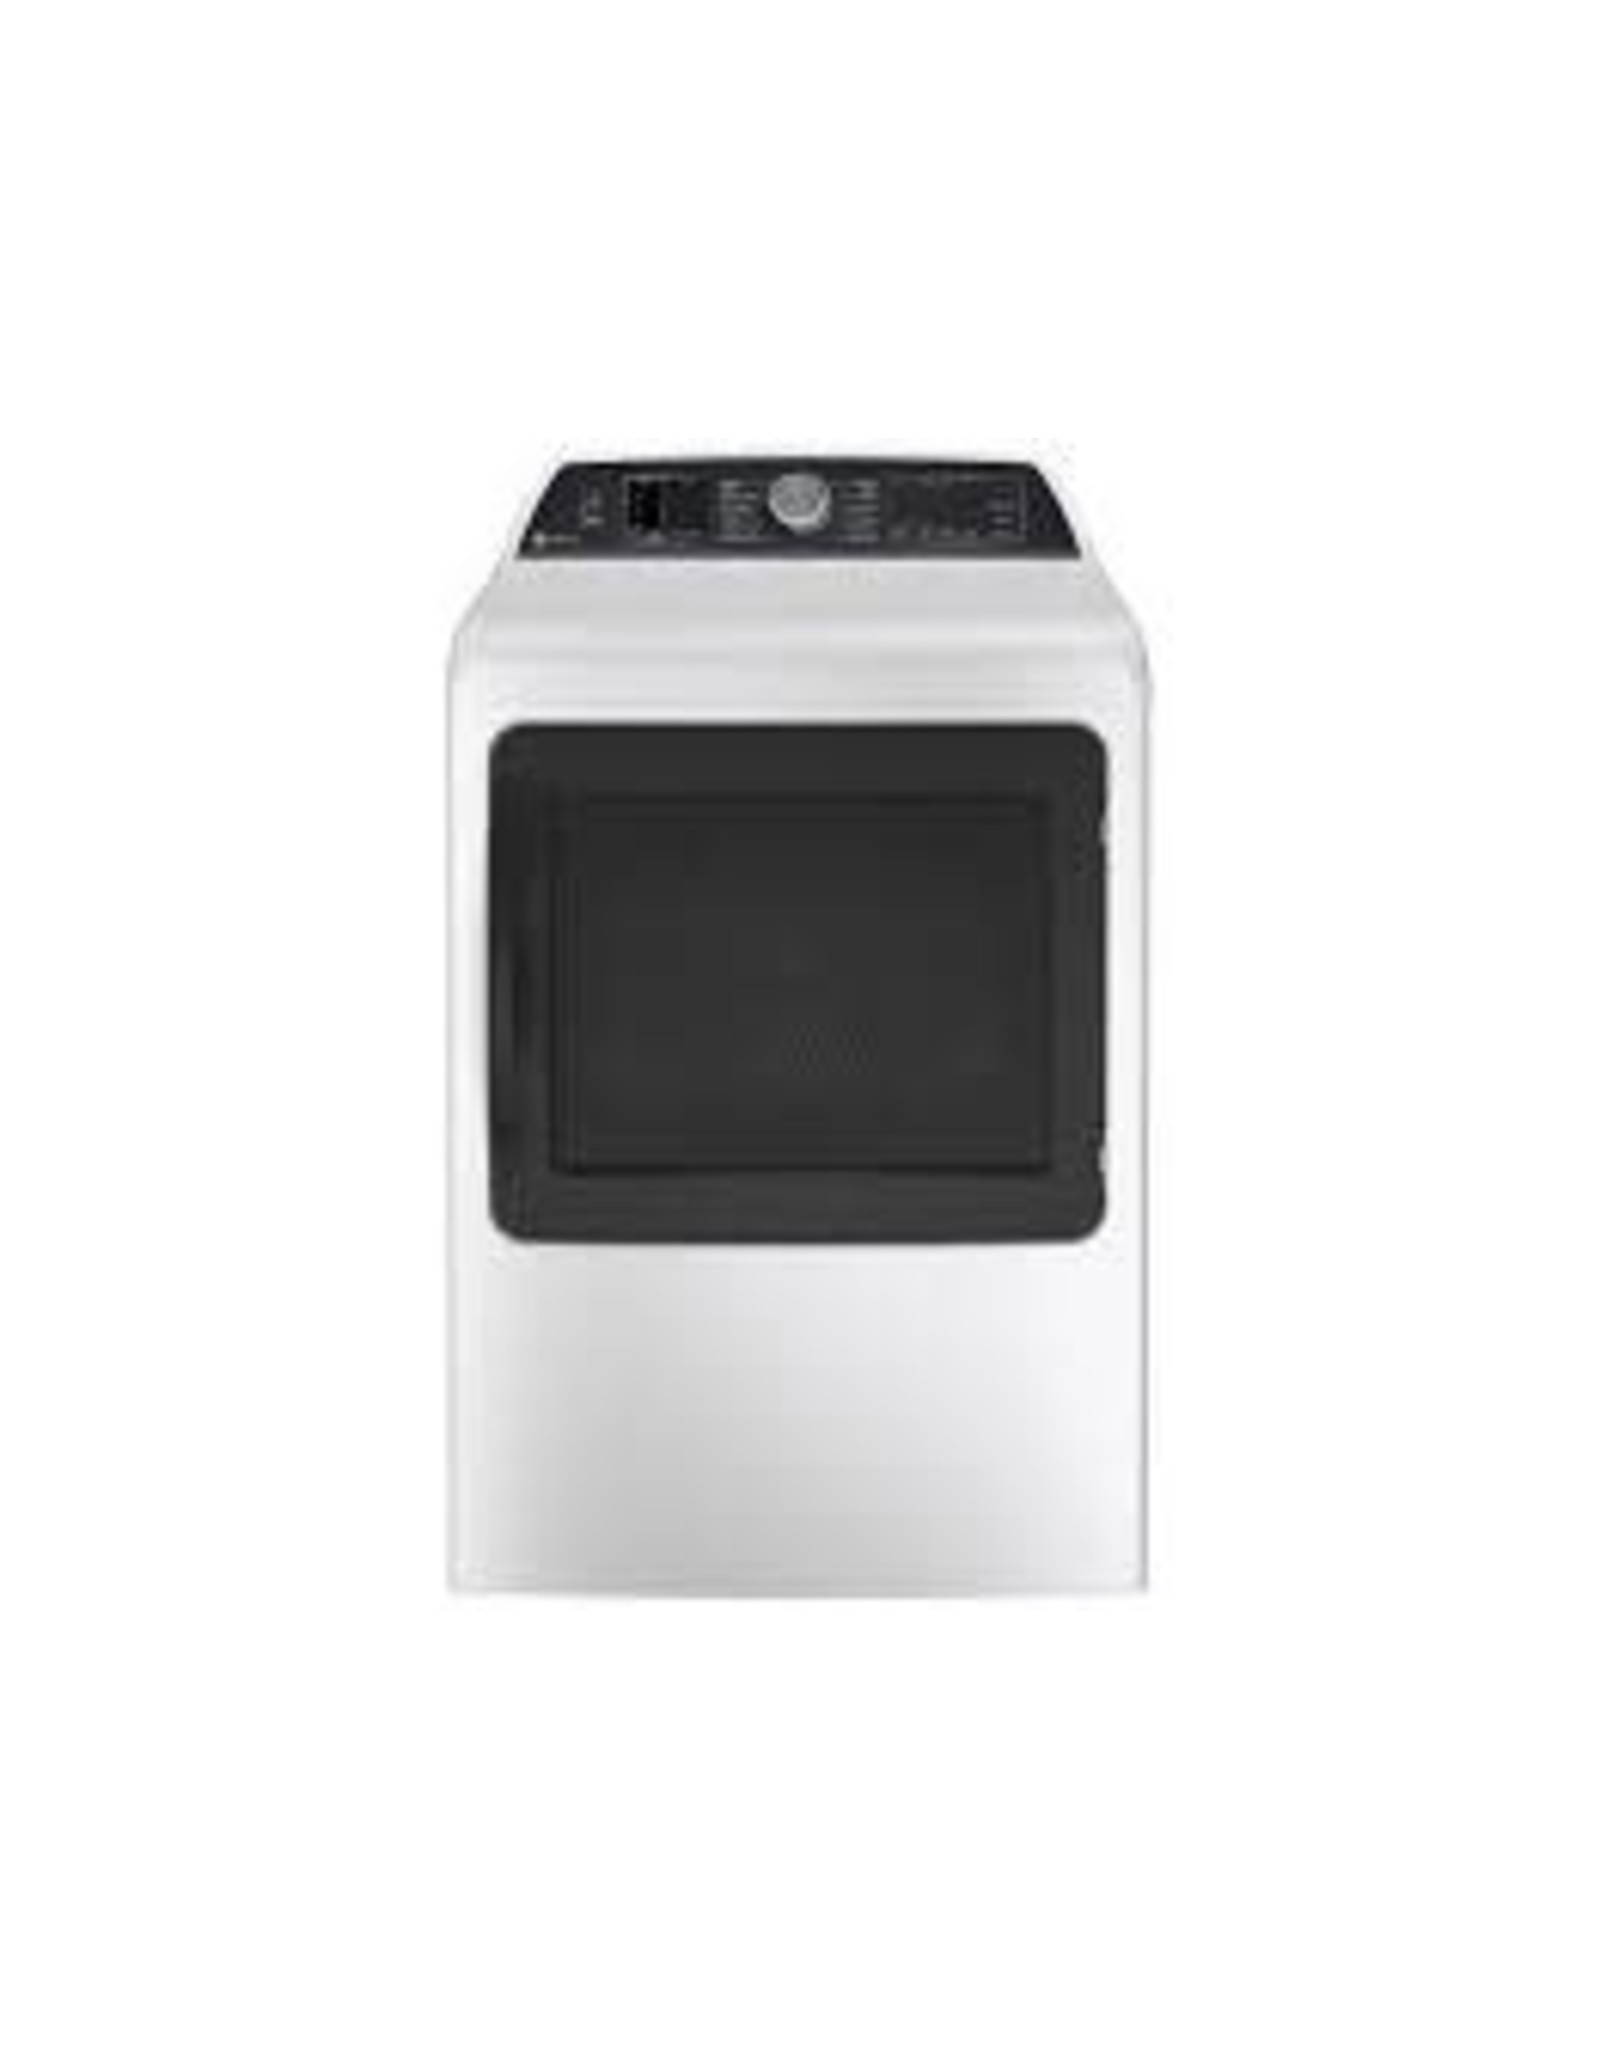 GE PTD70EBSTWS Profile 7.4 cu. ft. Electric Dryer in White with Steam, Sanitize Cycle, and Sensor Dry, ENERGY STAR